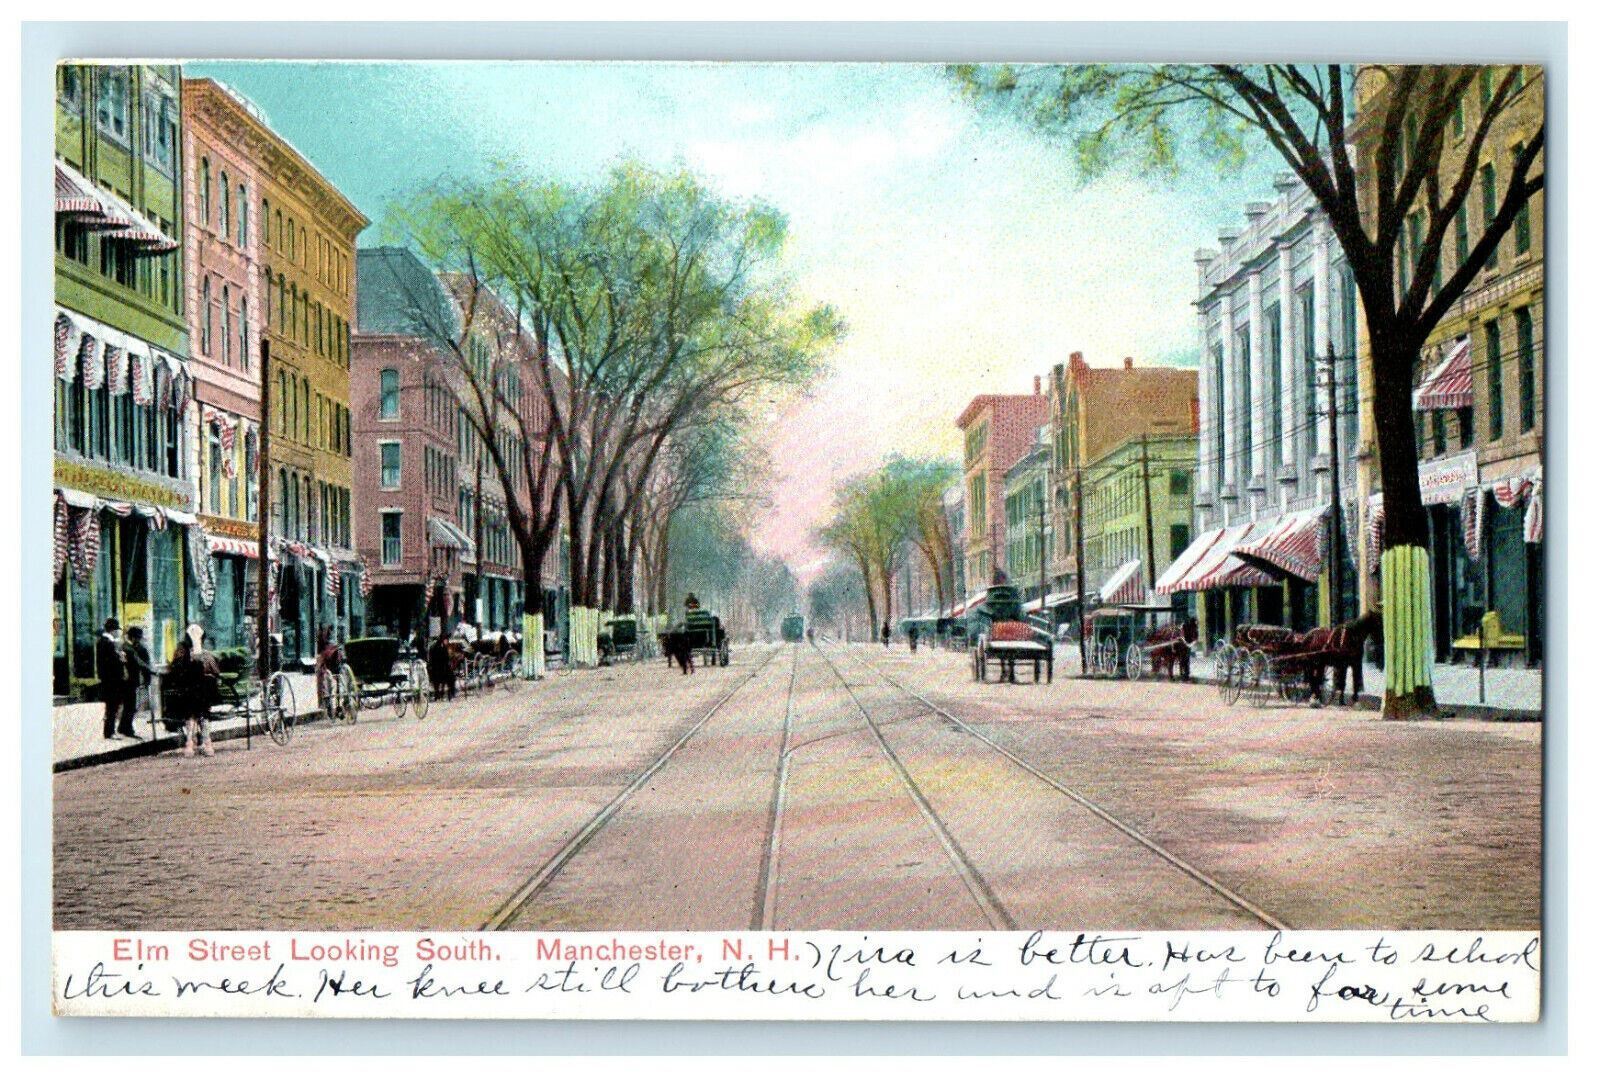 c1905s Elm Street Looking South, Manchester New Hampshire NH Antique Postcard